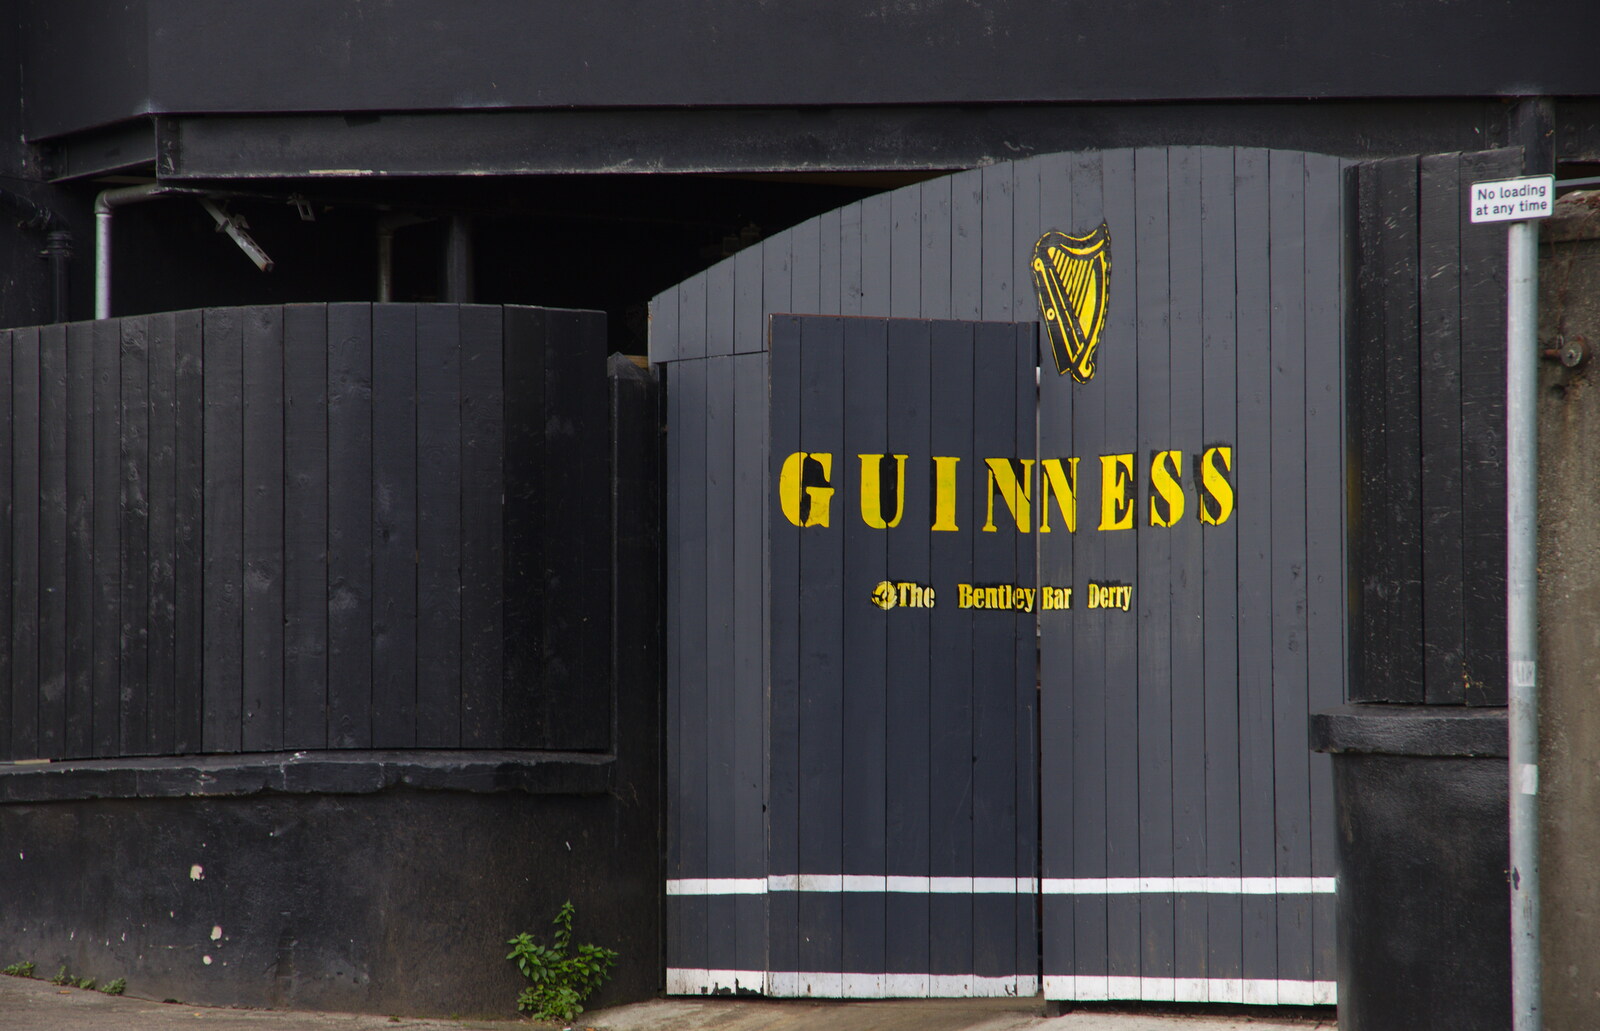 A yellow Guiness sign on the Bentley Bar's gate from A Day in Derry, County Londonderry, Northern Ireland - 15th August 2019